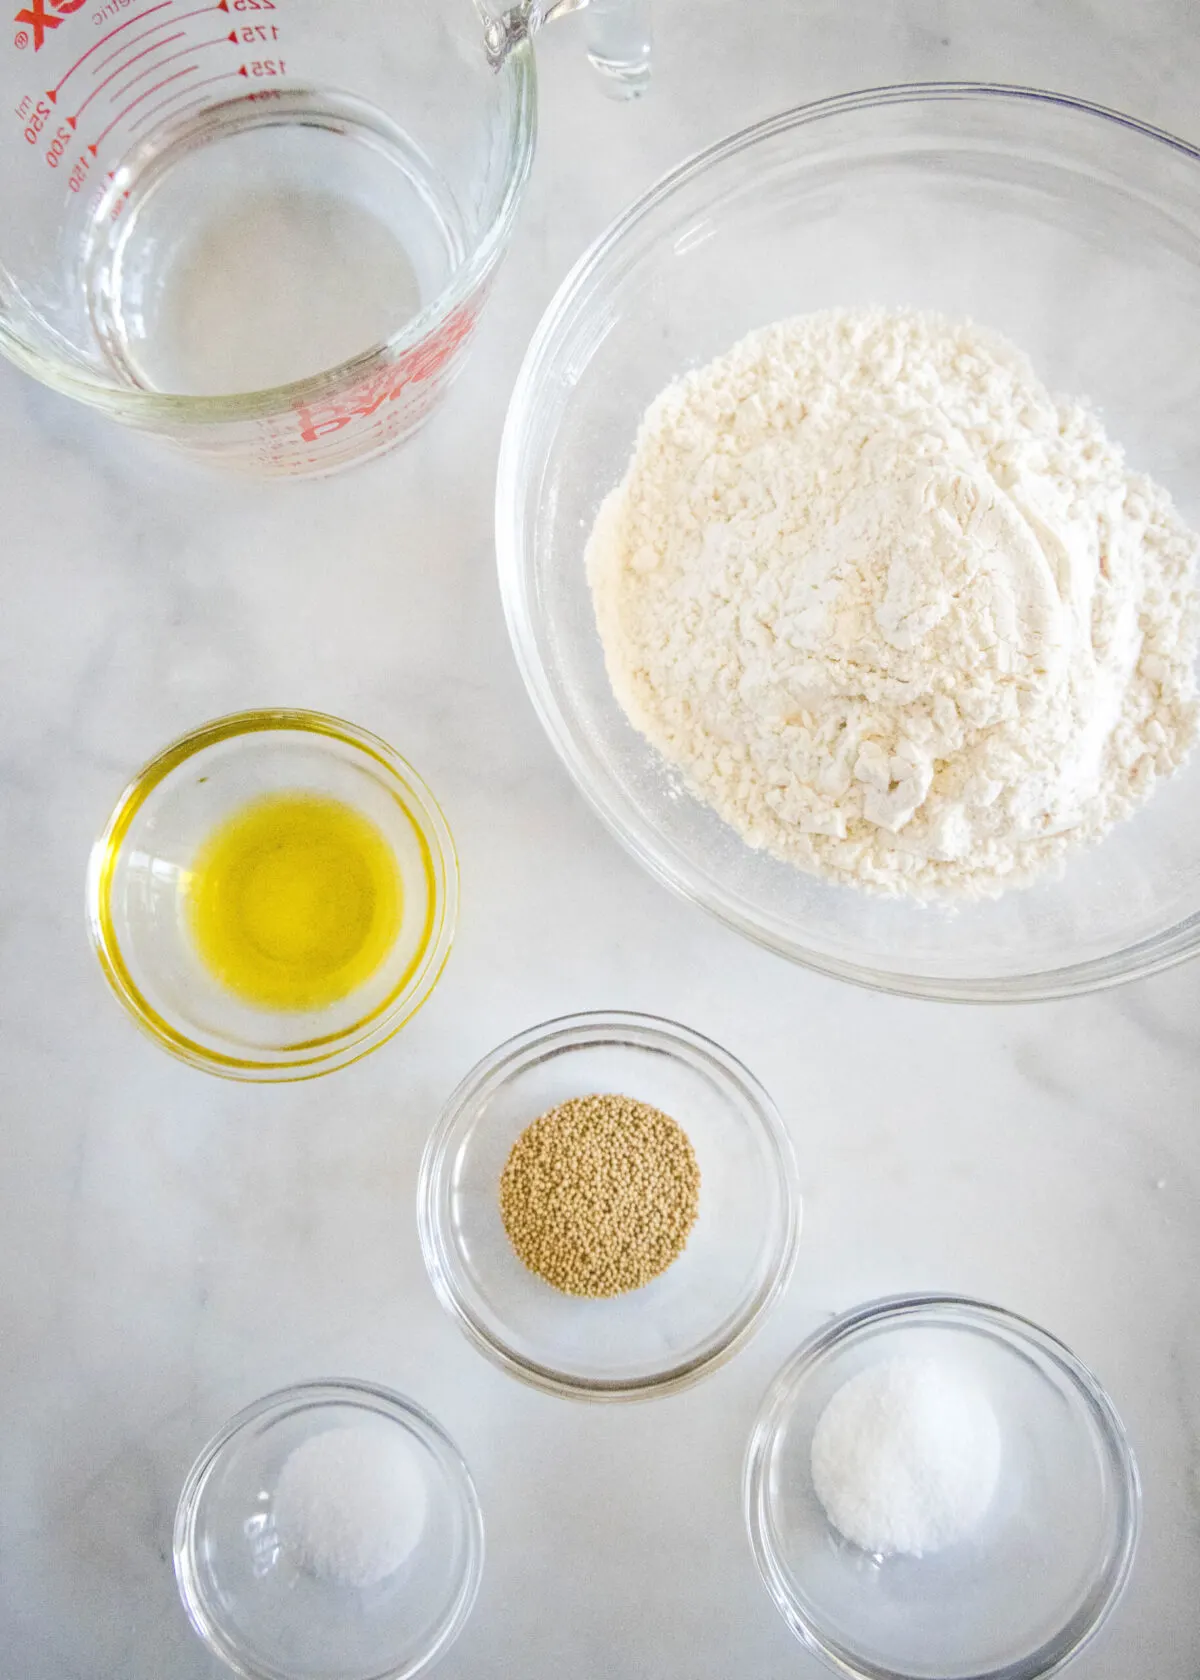 Overhead view of the ingredients needed for pizza dough: a bowl of flour, a bowl of yeast, a bowl of salt, a bowl of olive oil, a glass of water, and a pyrex of water